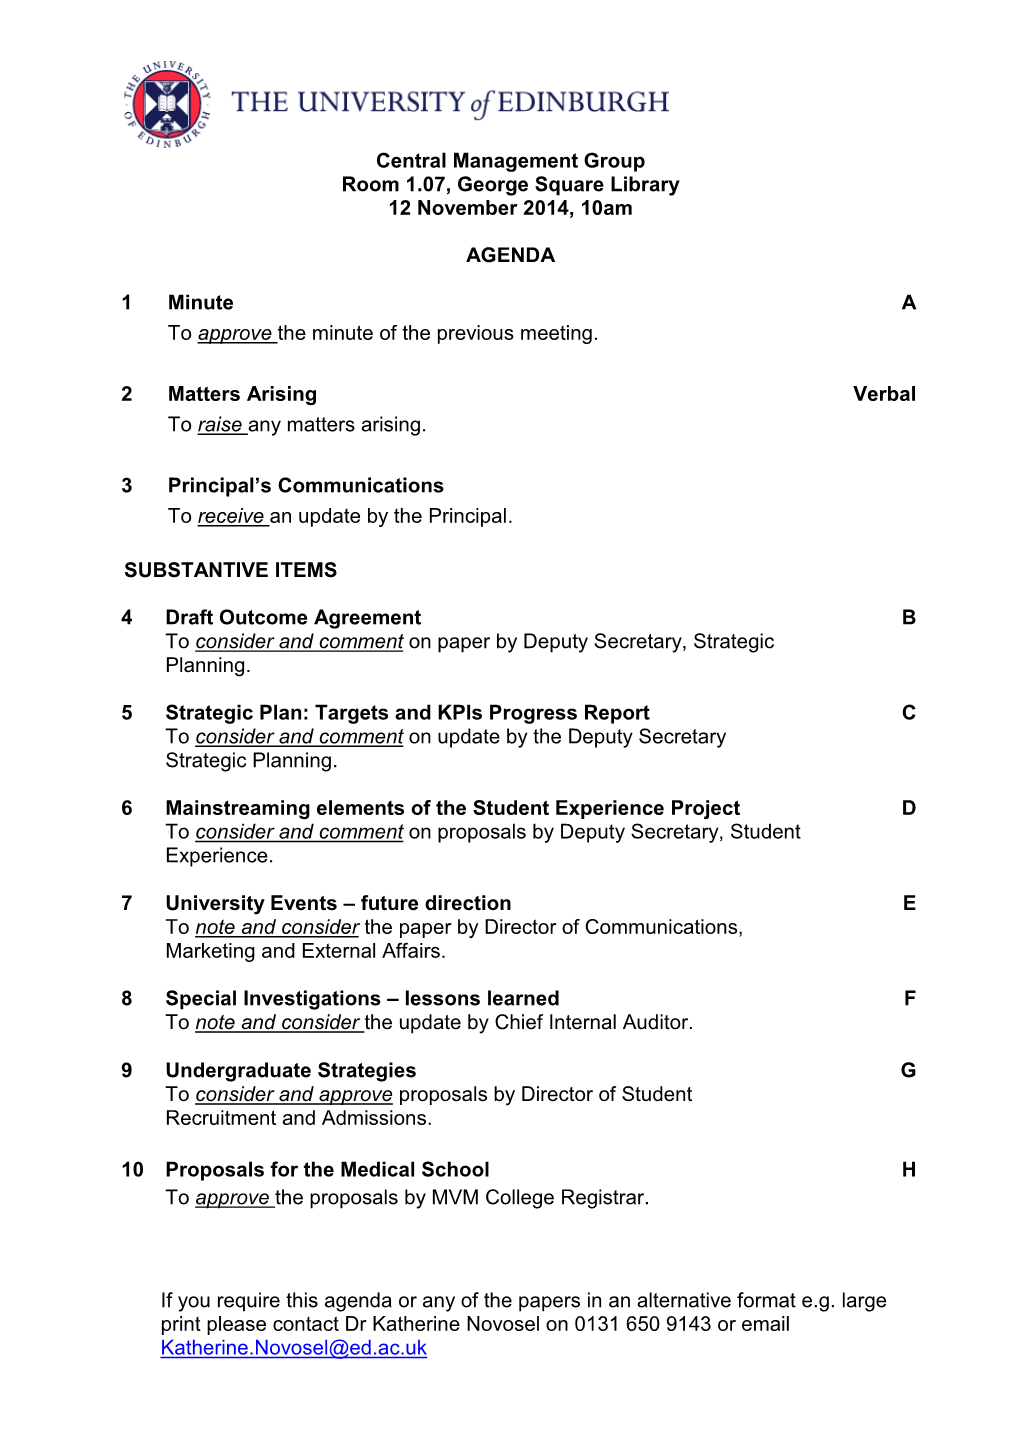 If You Require This Agenda Or Any of the Papers in an Alternative Format E.G